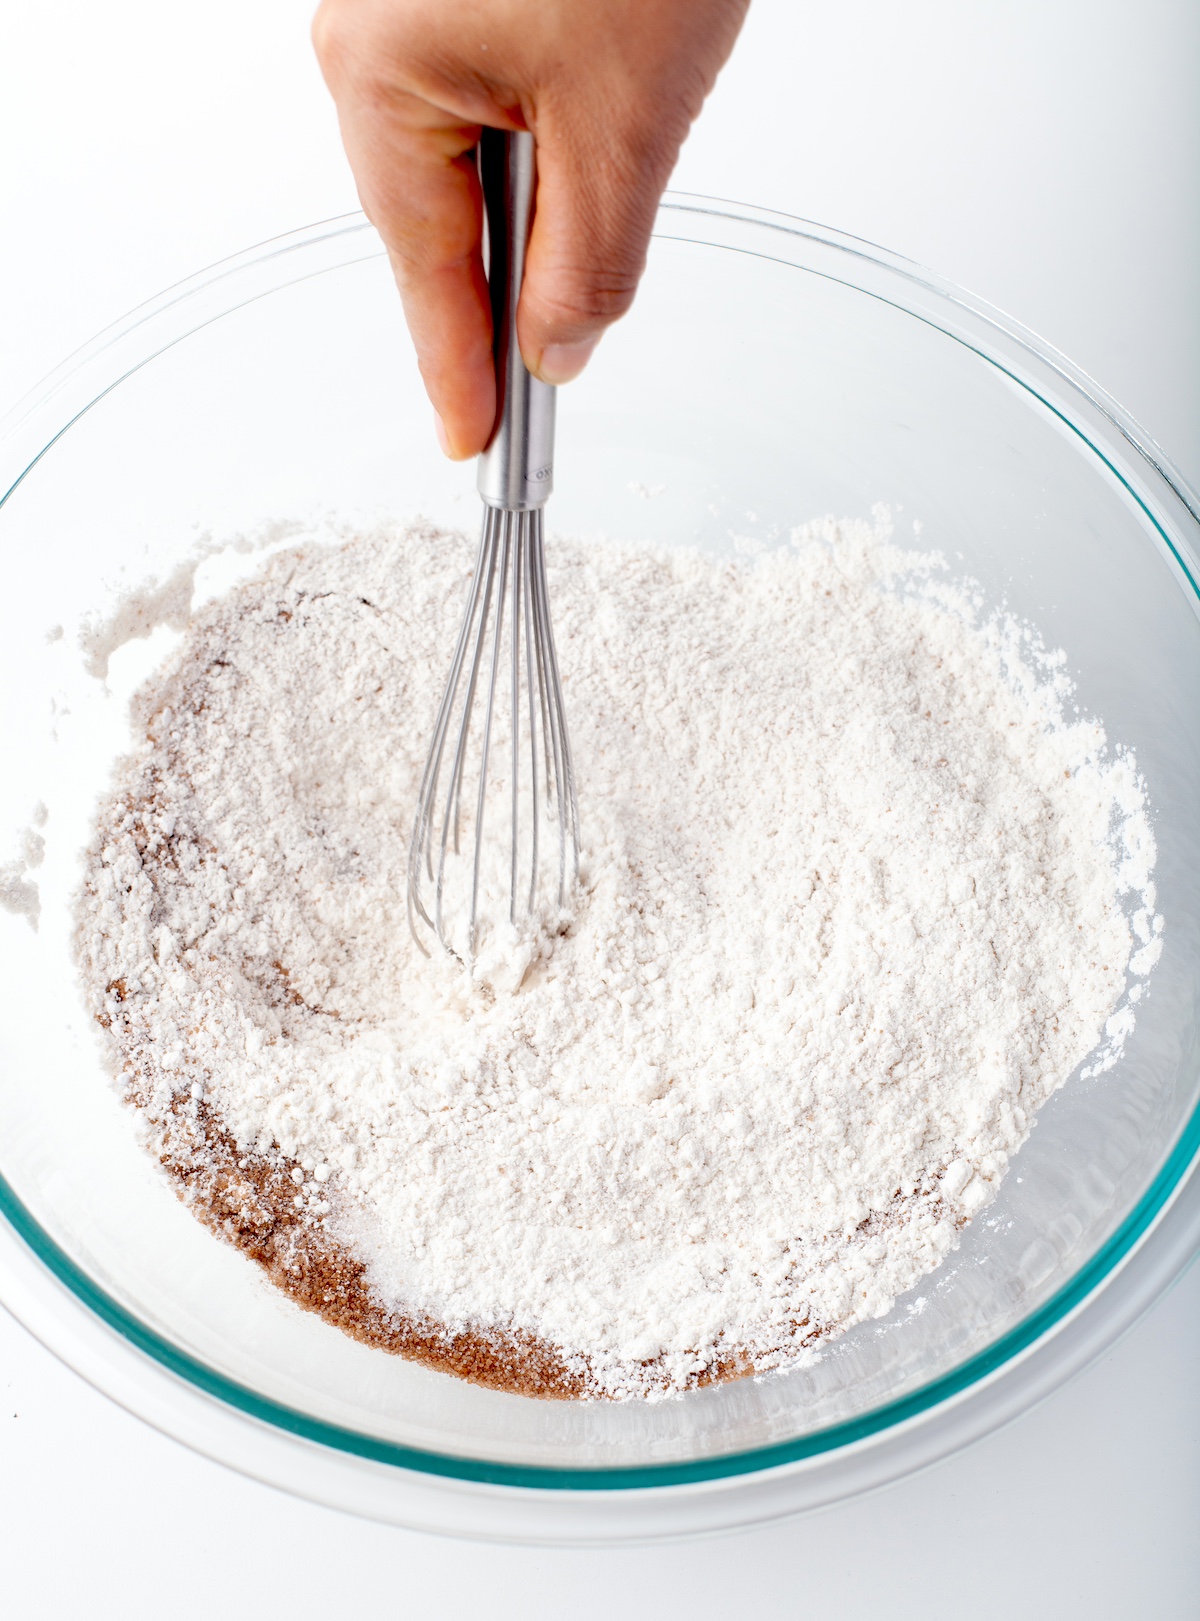 Hand using a whisk to mix flour, sugars, baking soda, cinnamon, and salt.